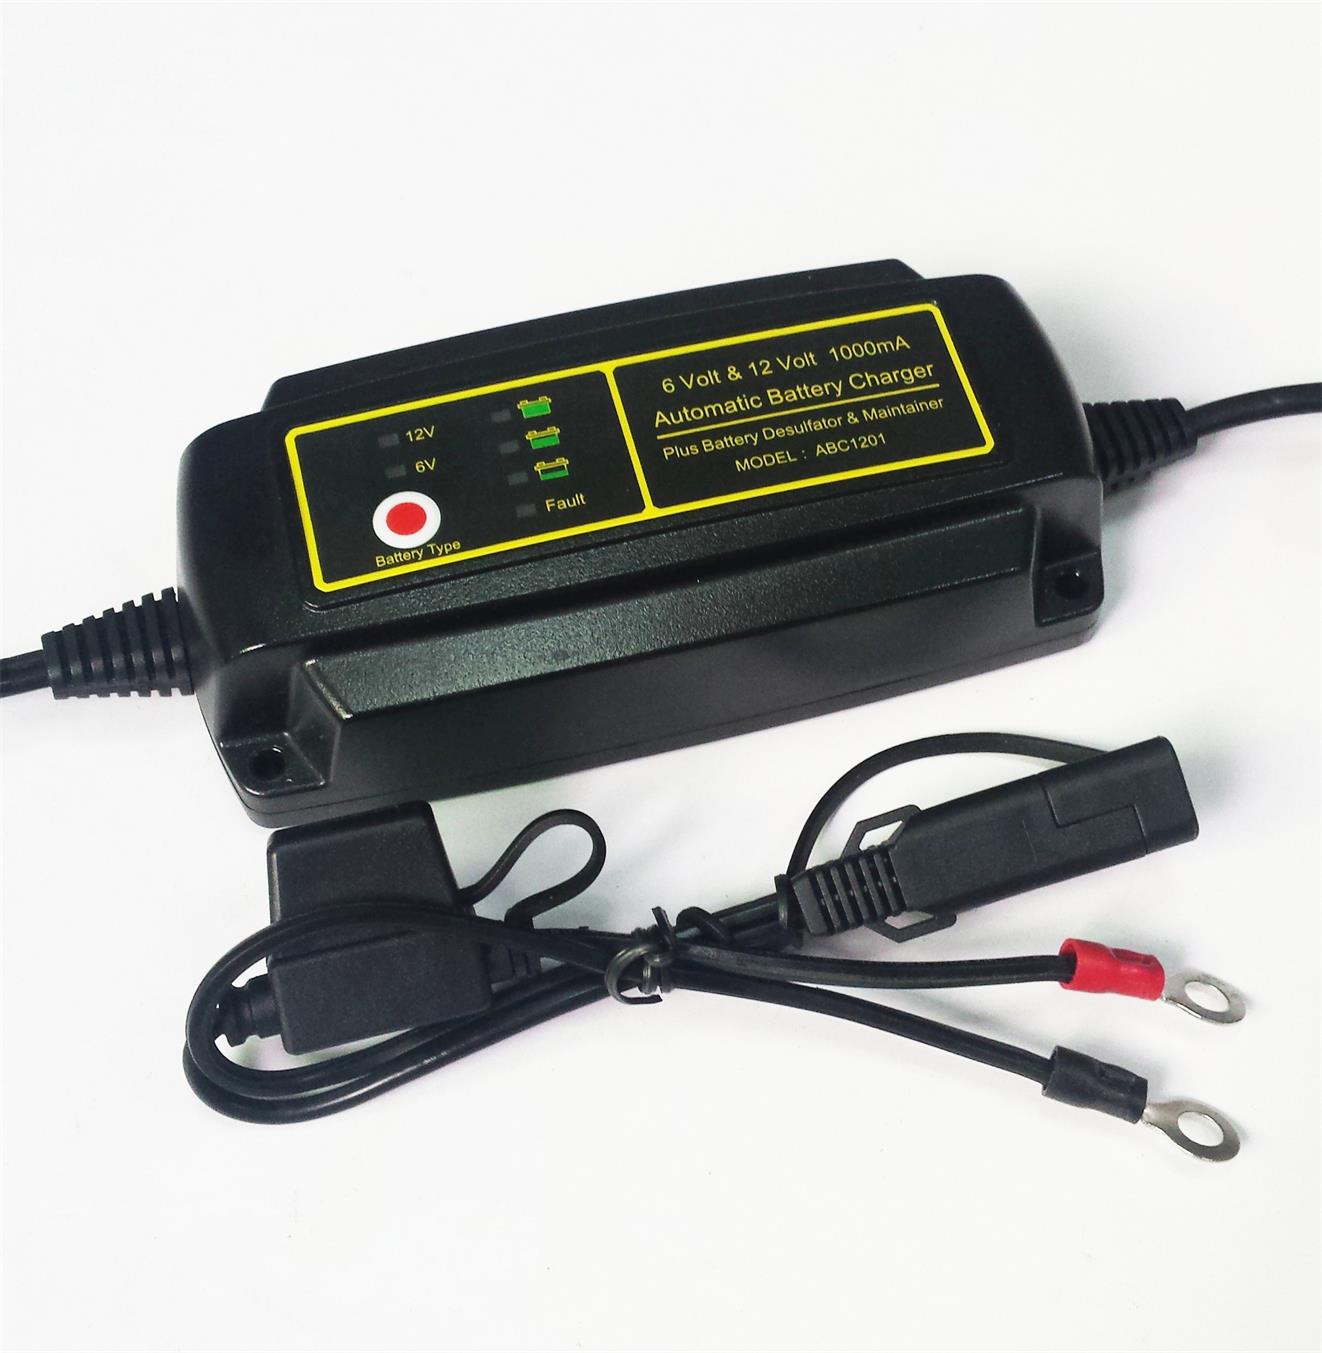 1000mA Smart Battery Charger